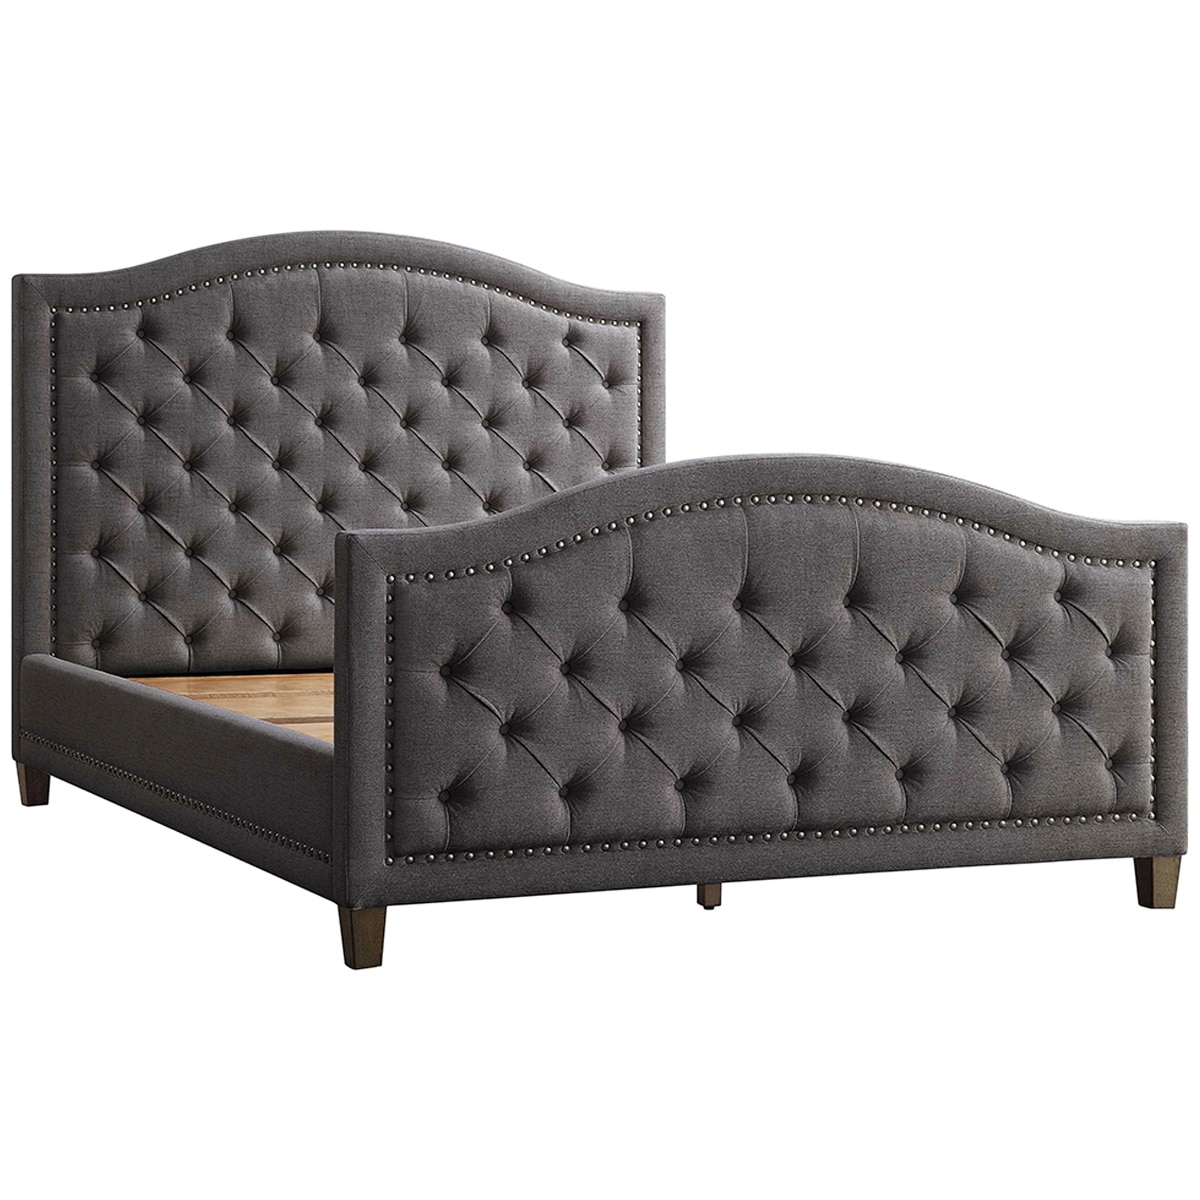 Thomasville Upholstered Queen Bed Grey